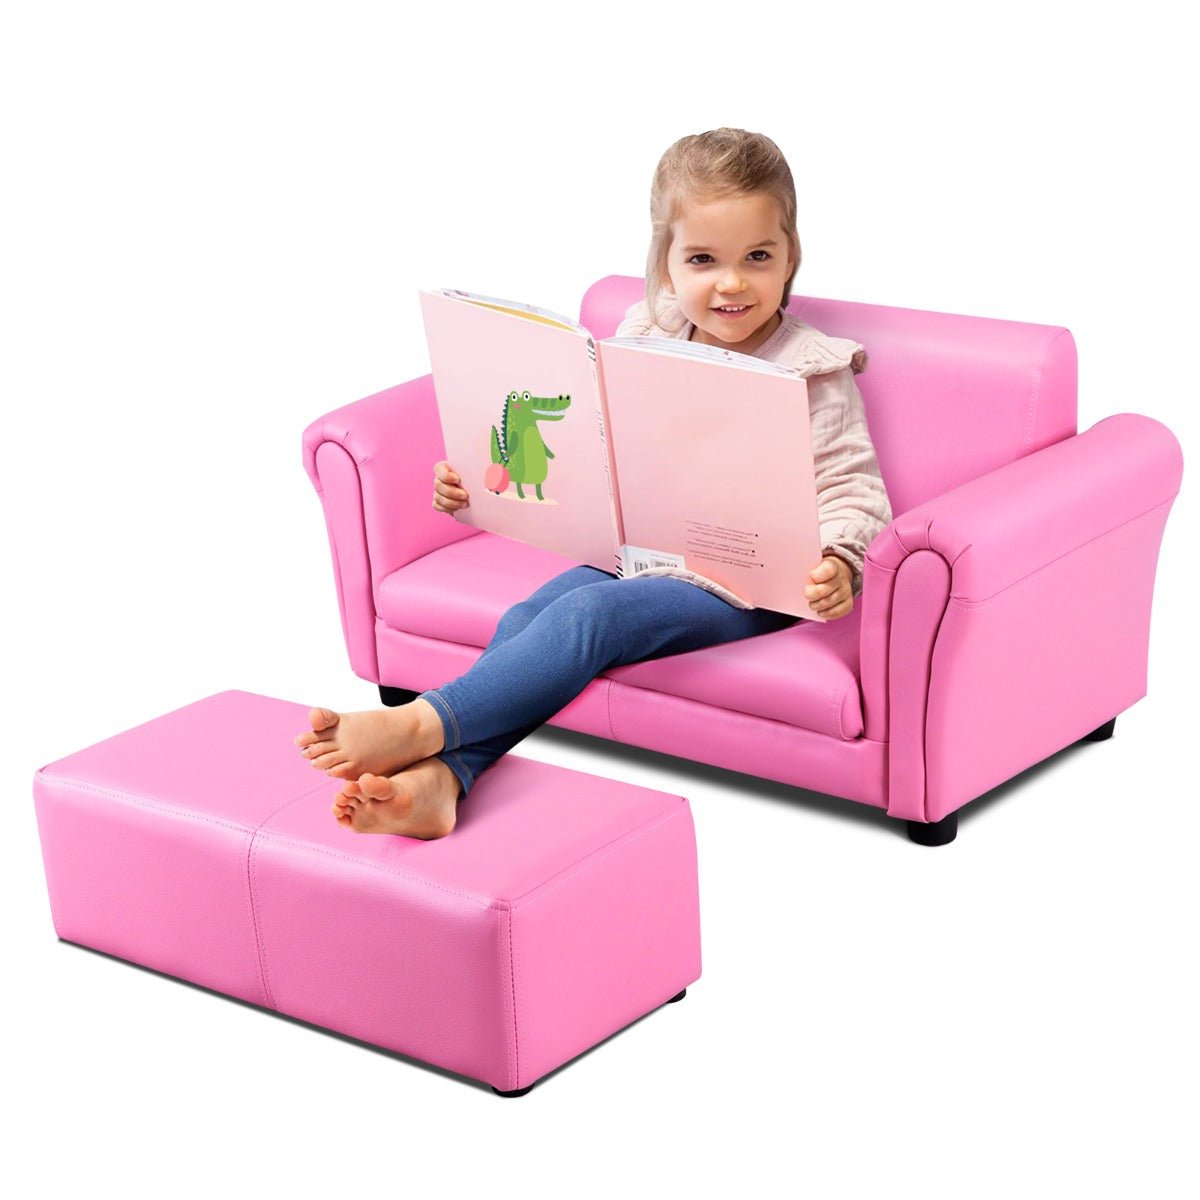 Boys' and Girls' Sofa Set: 2-Seat with Footstool and Sturdy Wooden Frame